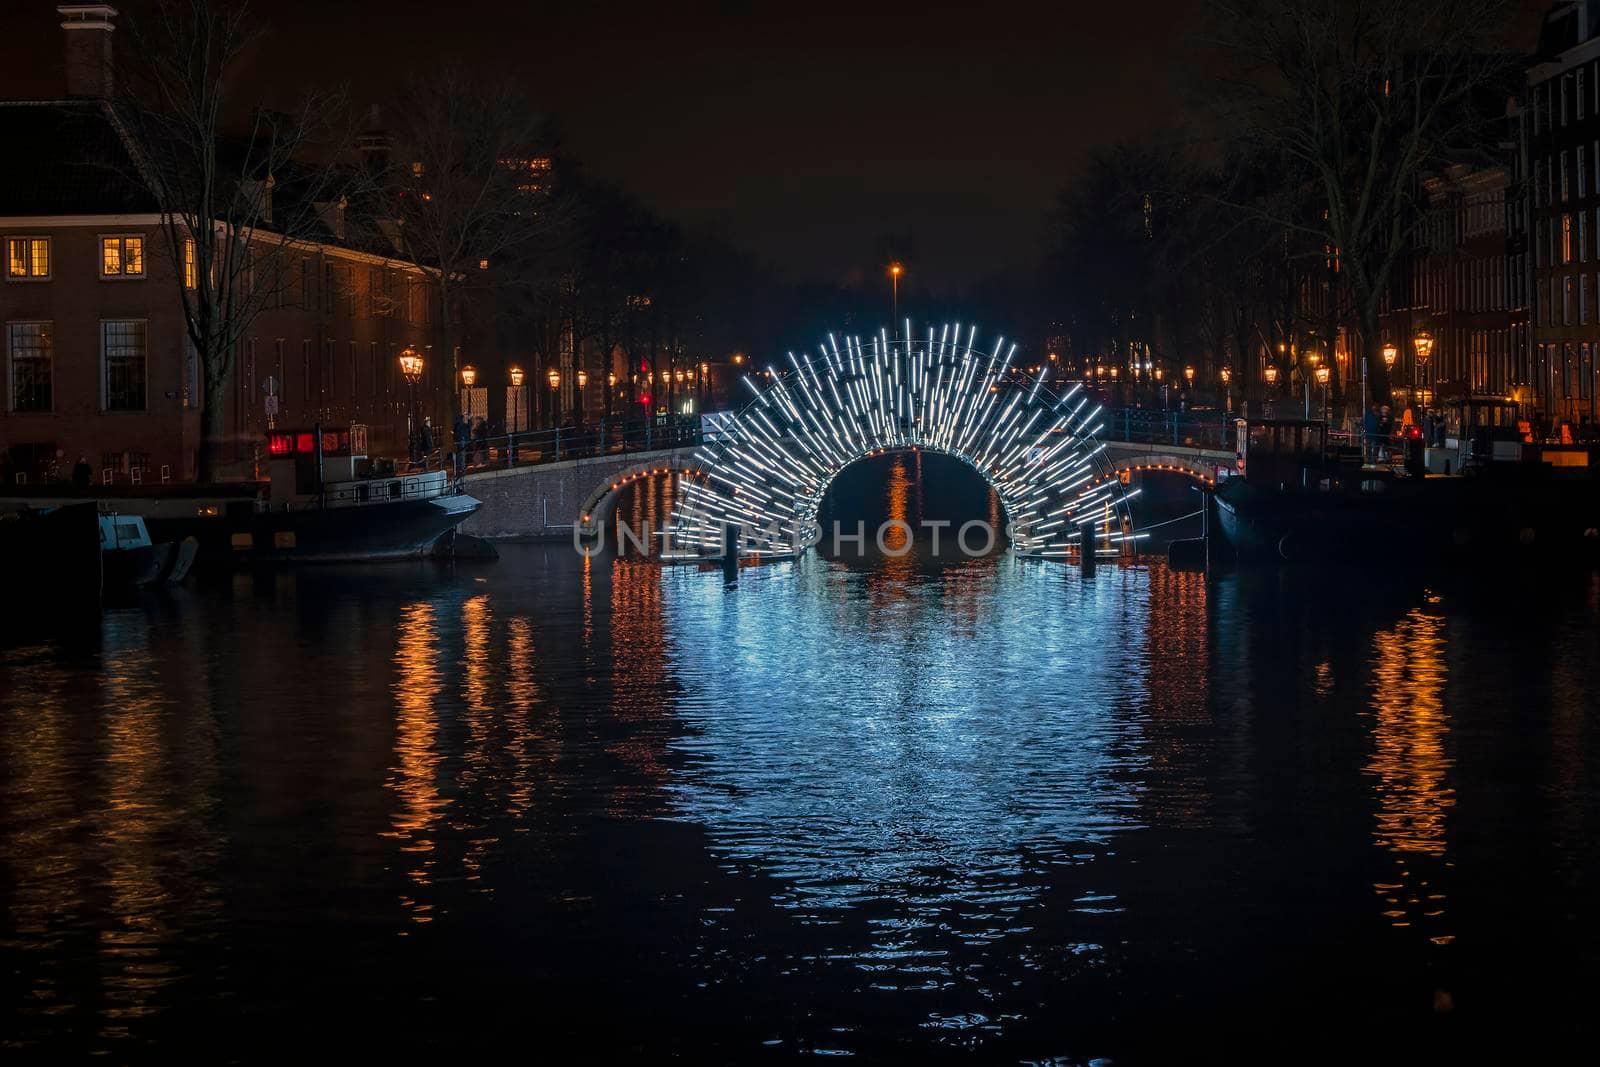 Illuminated bridge in Amsterdam at the Amstel in the Netherlands at night